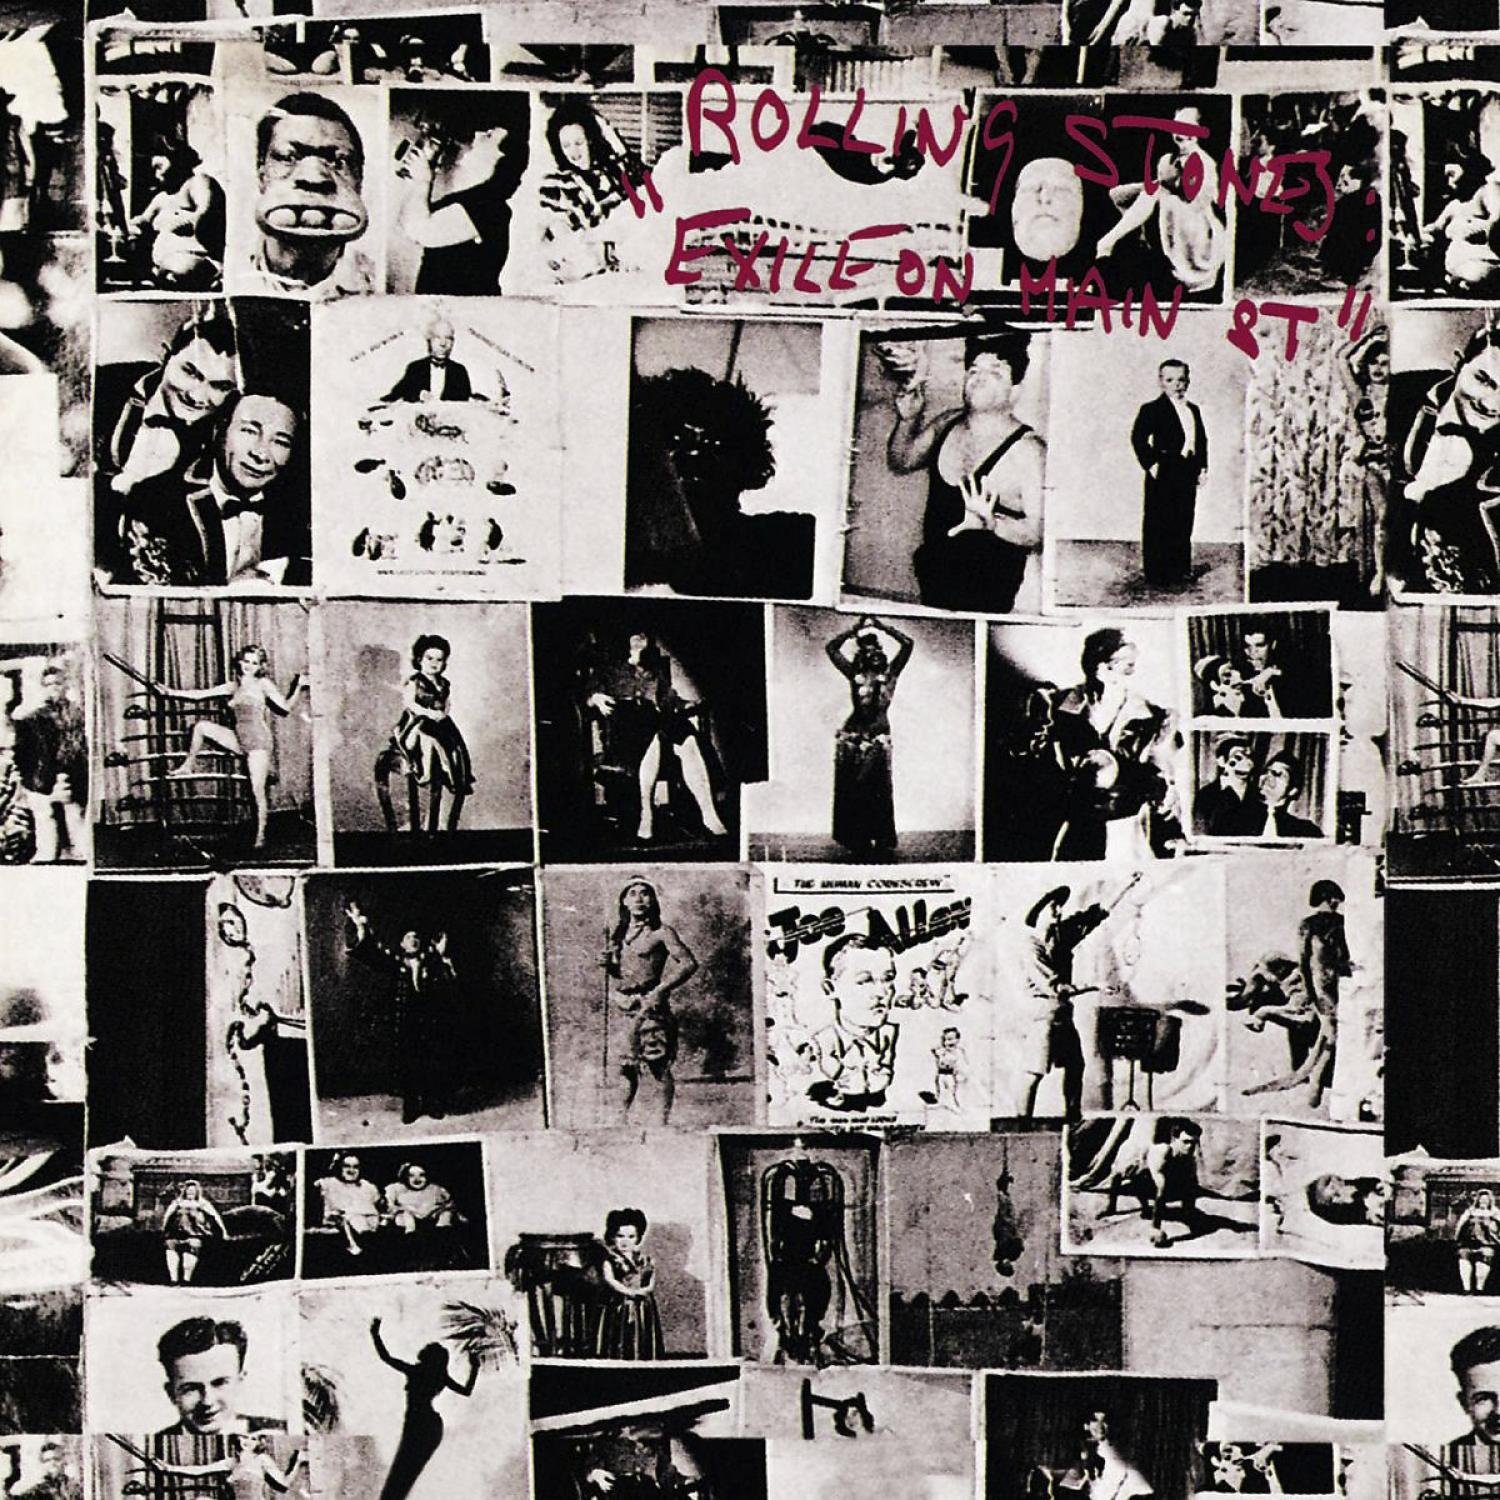 (CD) - Edition) On Deluxe The Street Main Exile - Rolling (Remastered Stones